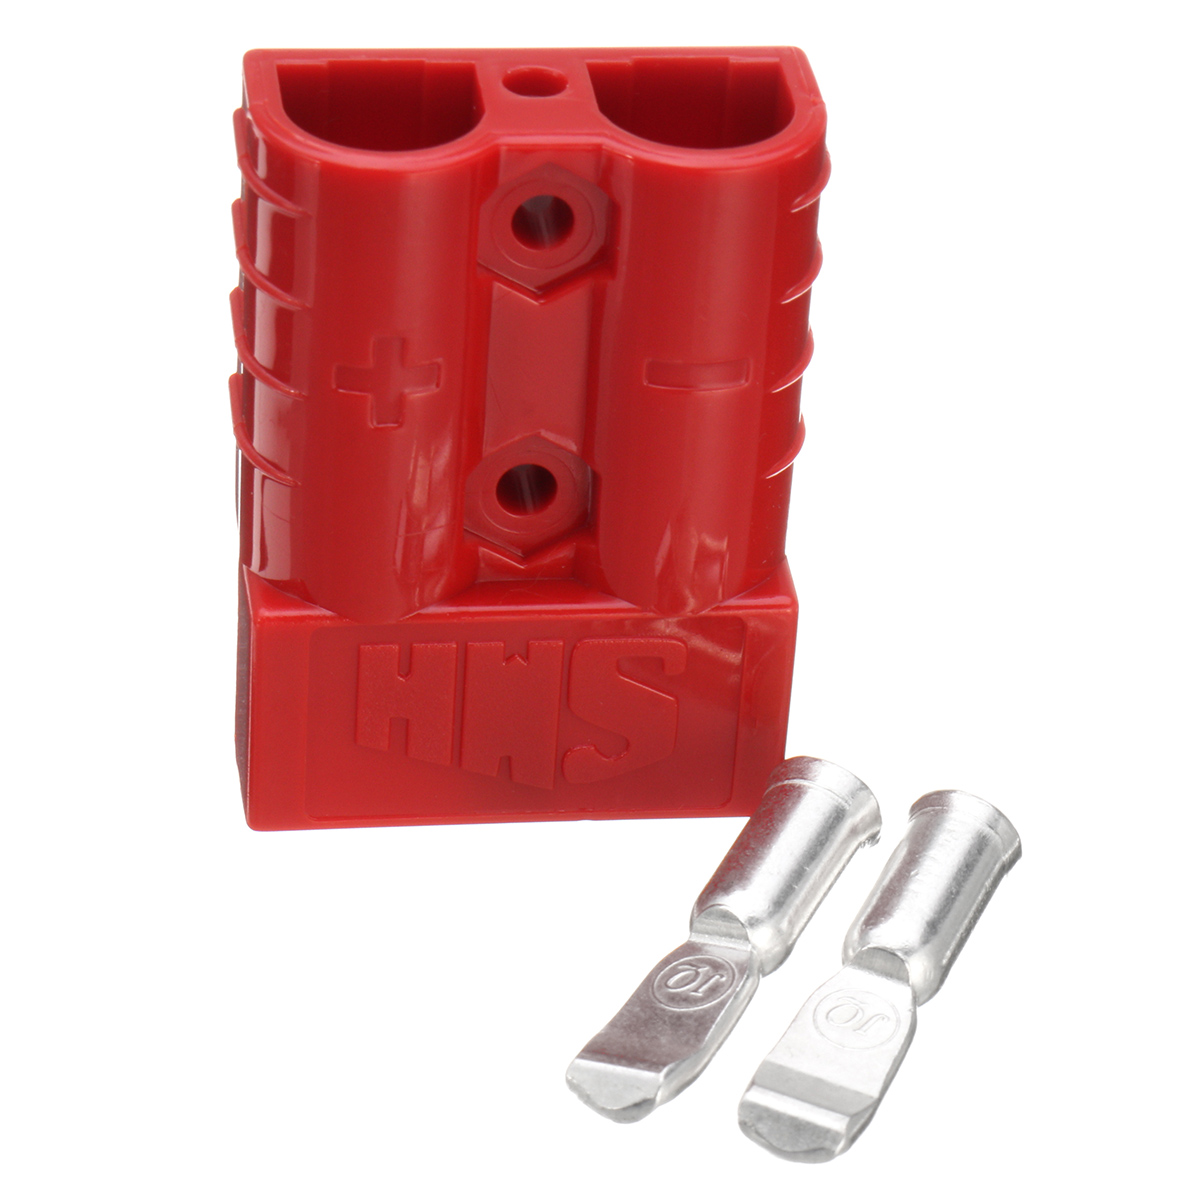 Excellway-50A-8AWG-Battery-Quick-Connector-Plug-Connect-Terminal-Disconnect-Winch-Trailer-Red-1170740-2